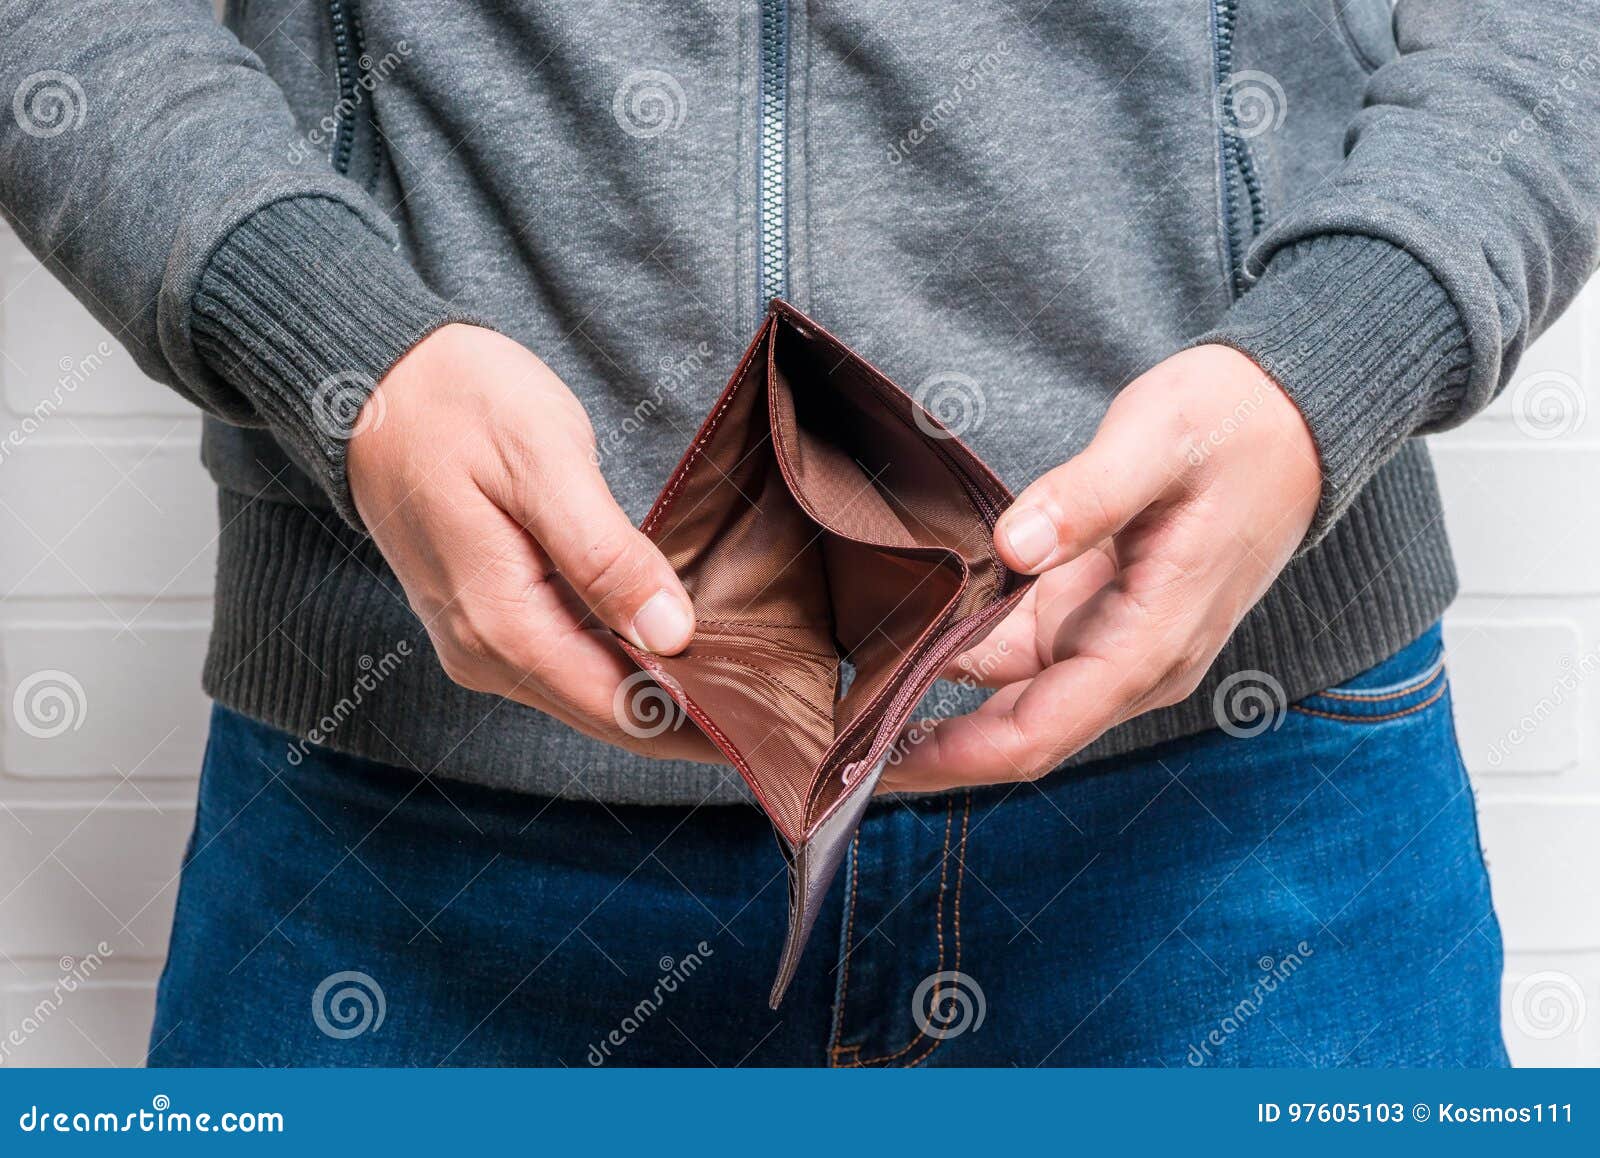 Empty purse stock photo. Image of wages, cowhide, human - 5975186